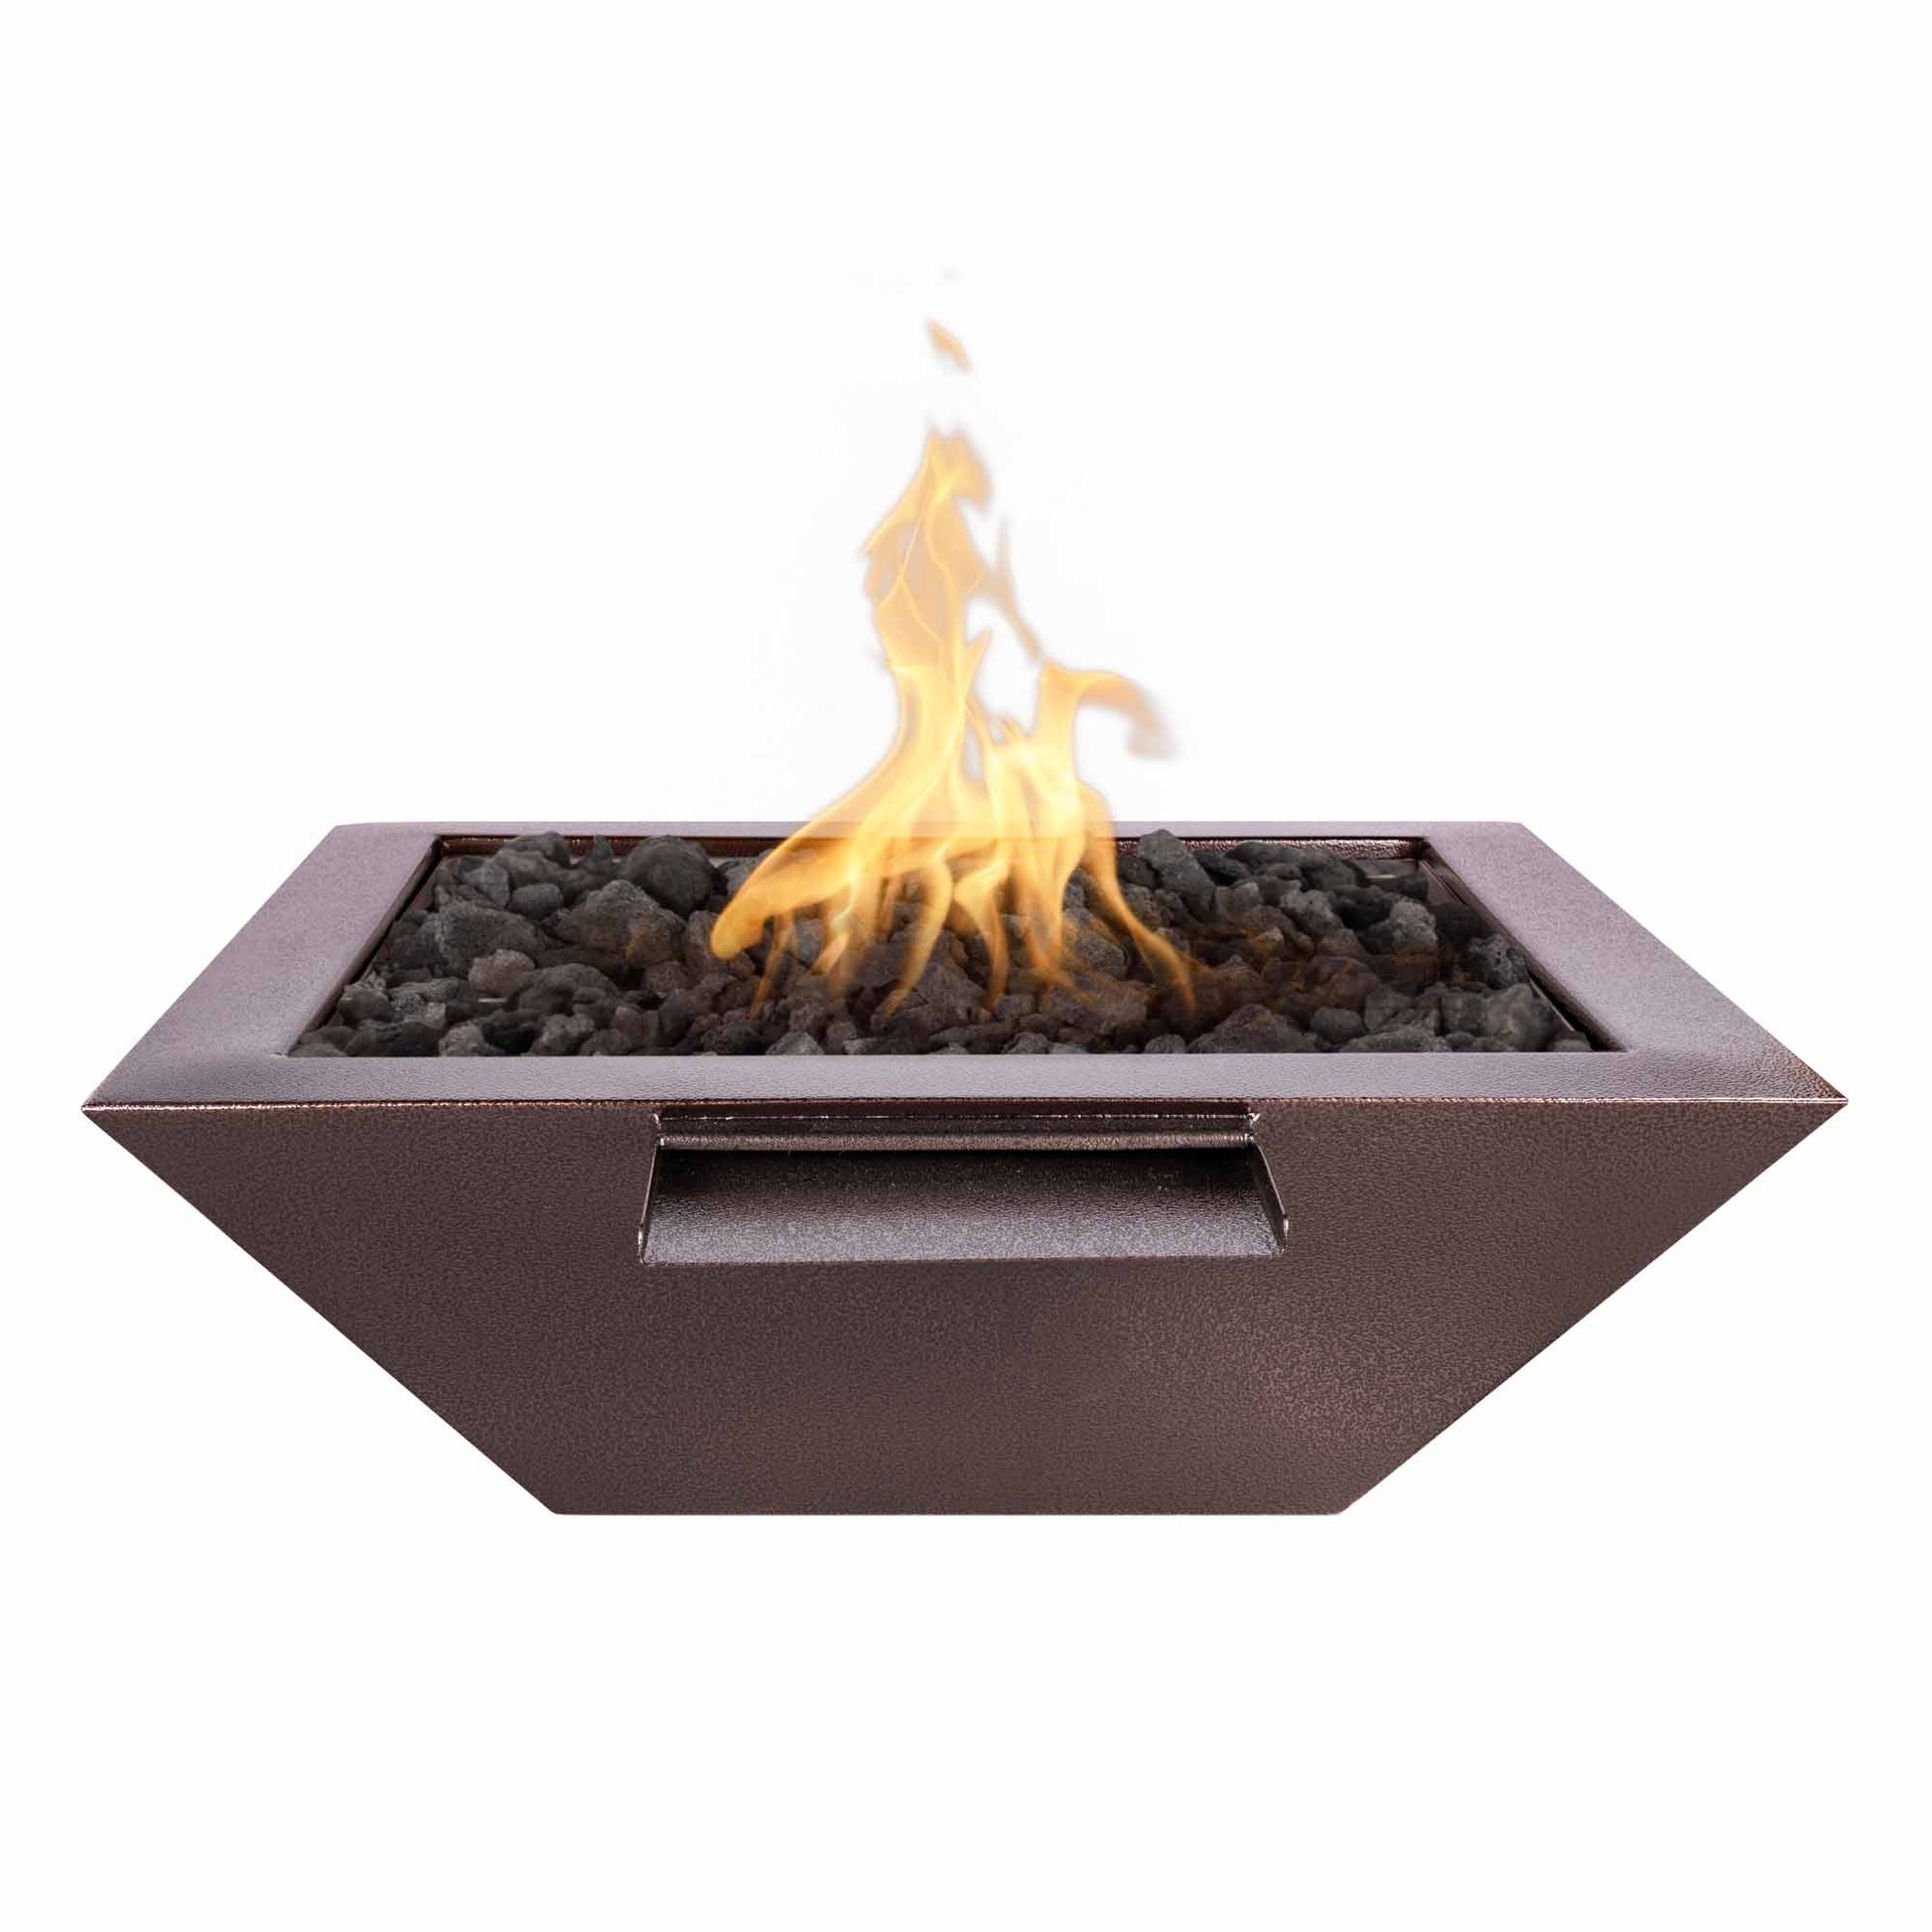 The Outdoor Plus Square Maya 36" White Powder Coated Metal Liquid Propane Fire Bowl with Match Lit with Flame Sense Ignition